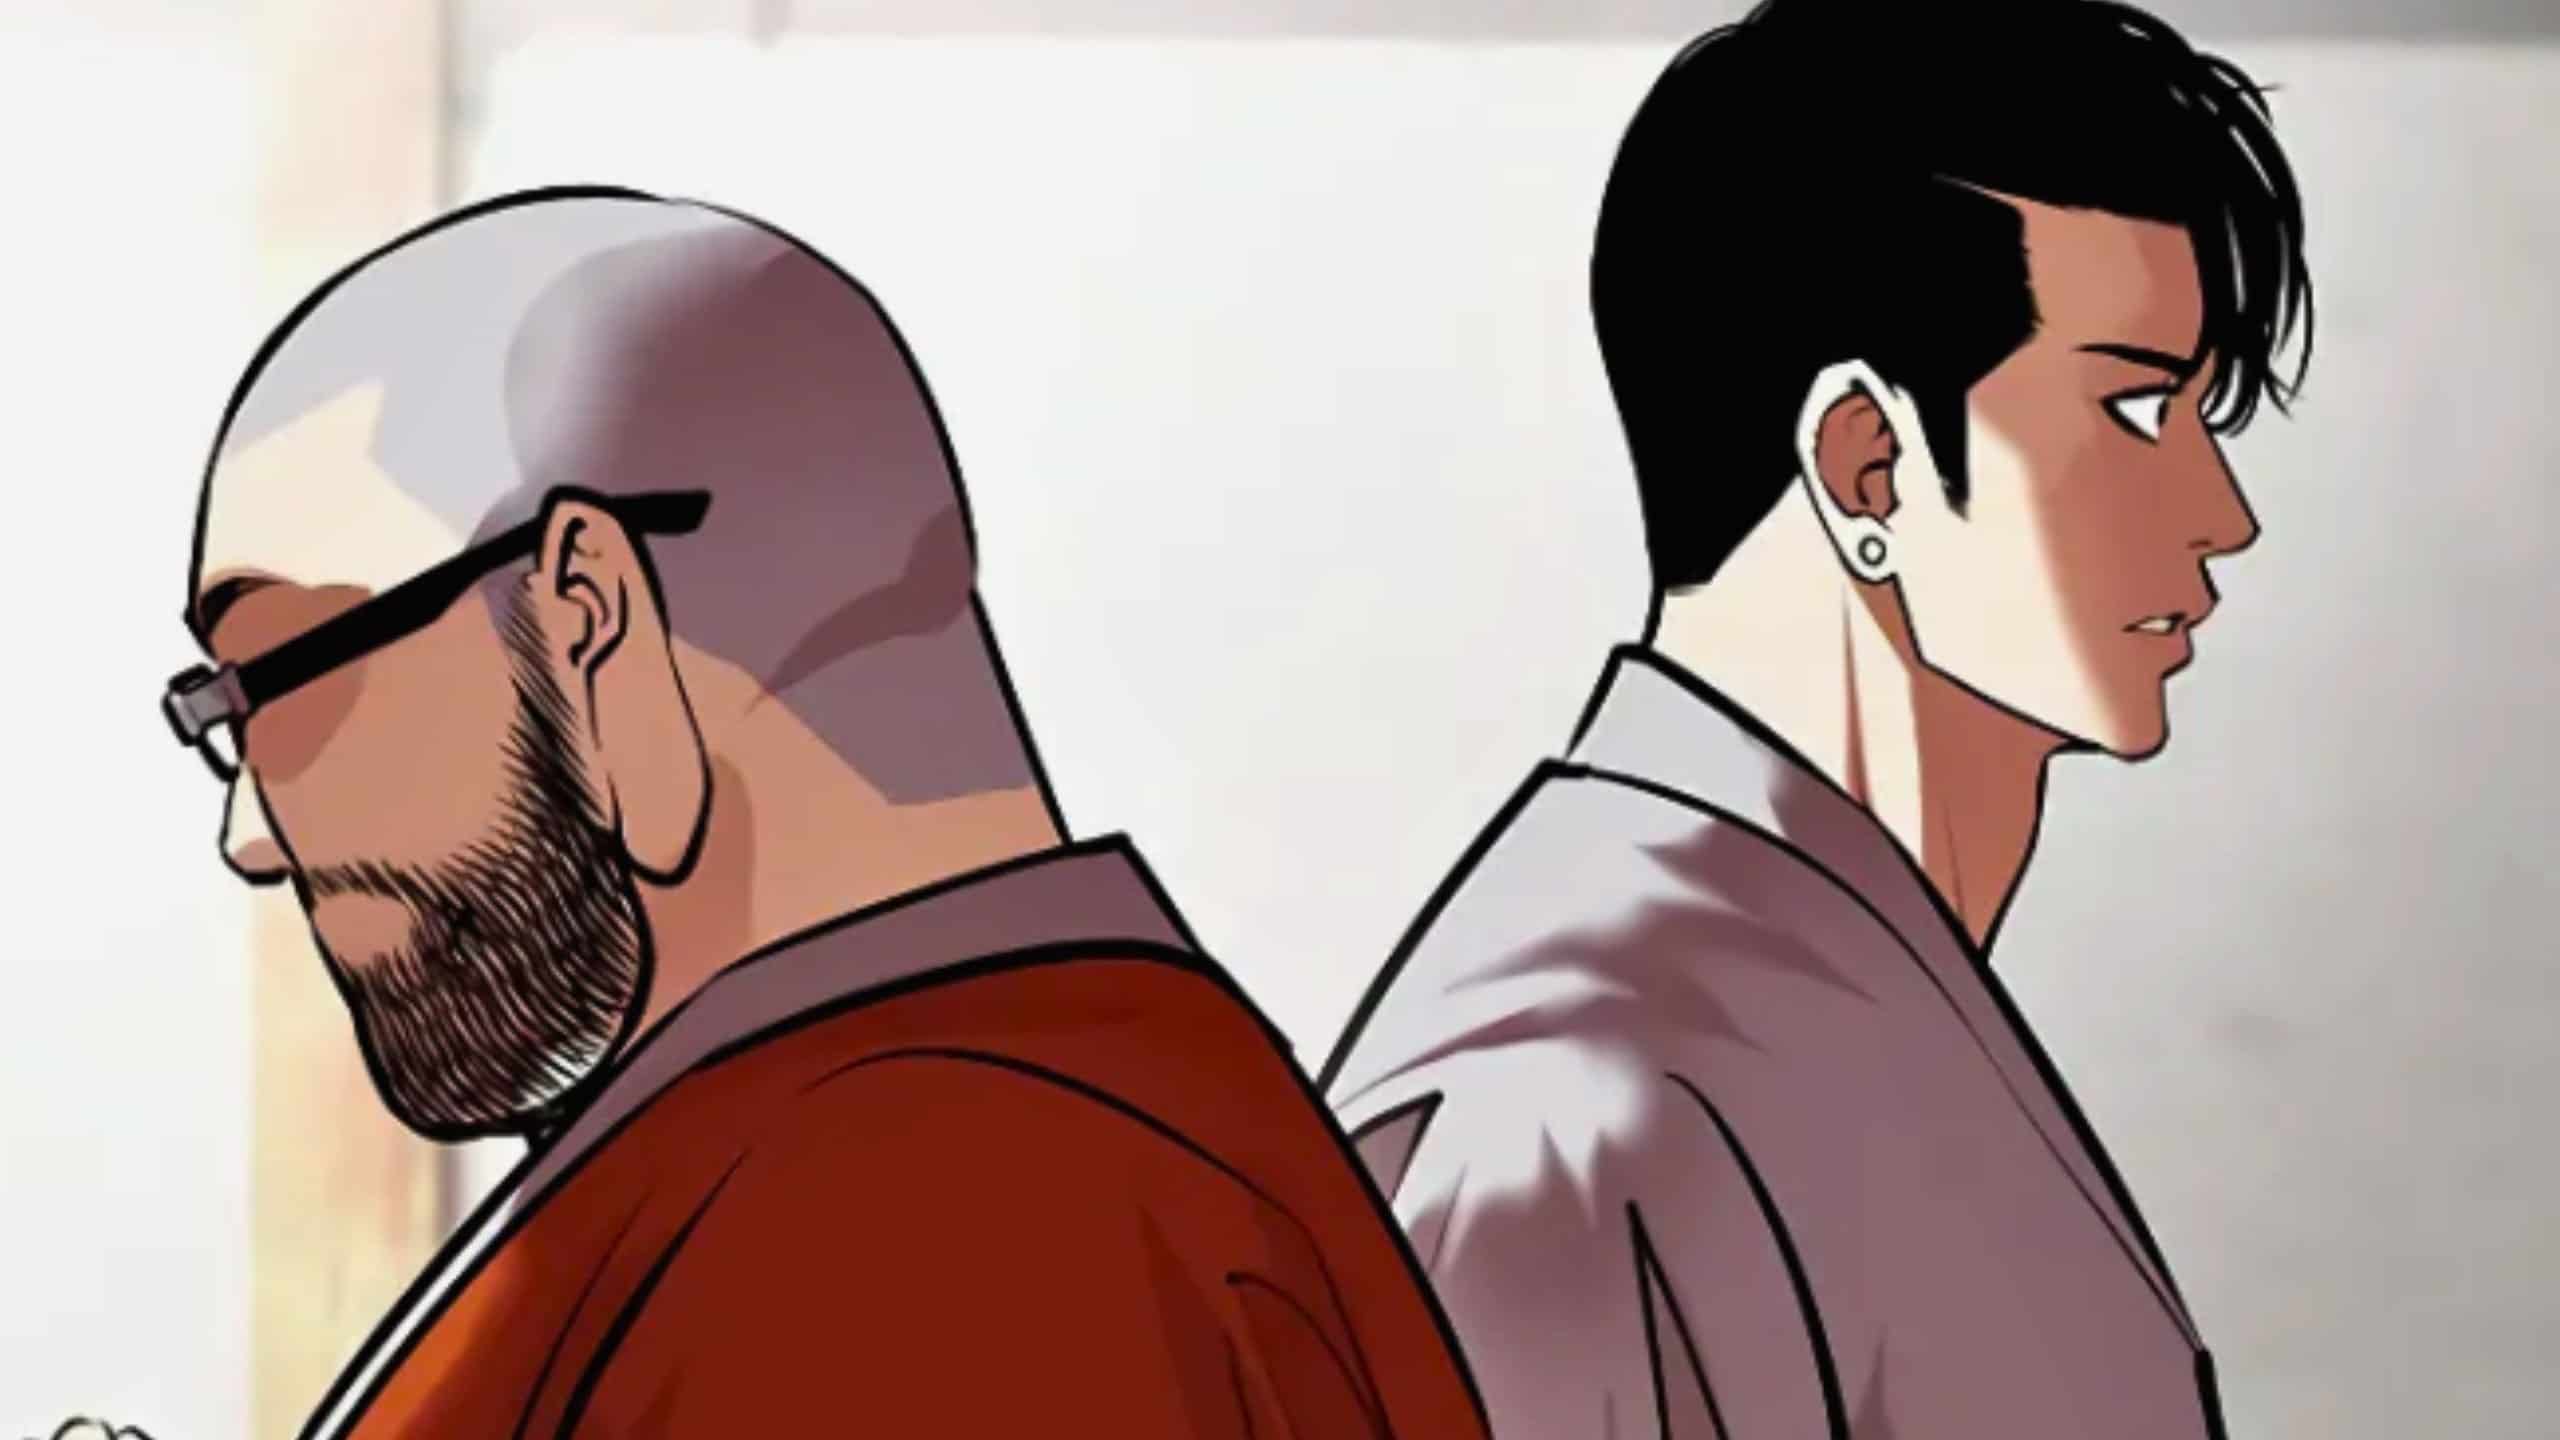 Lookism (2022) Netflix Anime Series Review Ending Explained at the End -  hanguk aenimeisyeon - YouTube